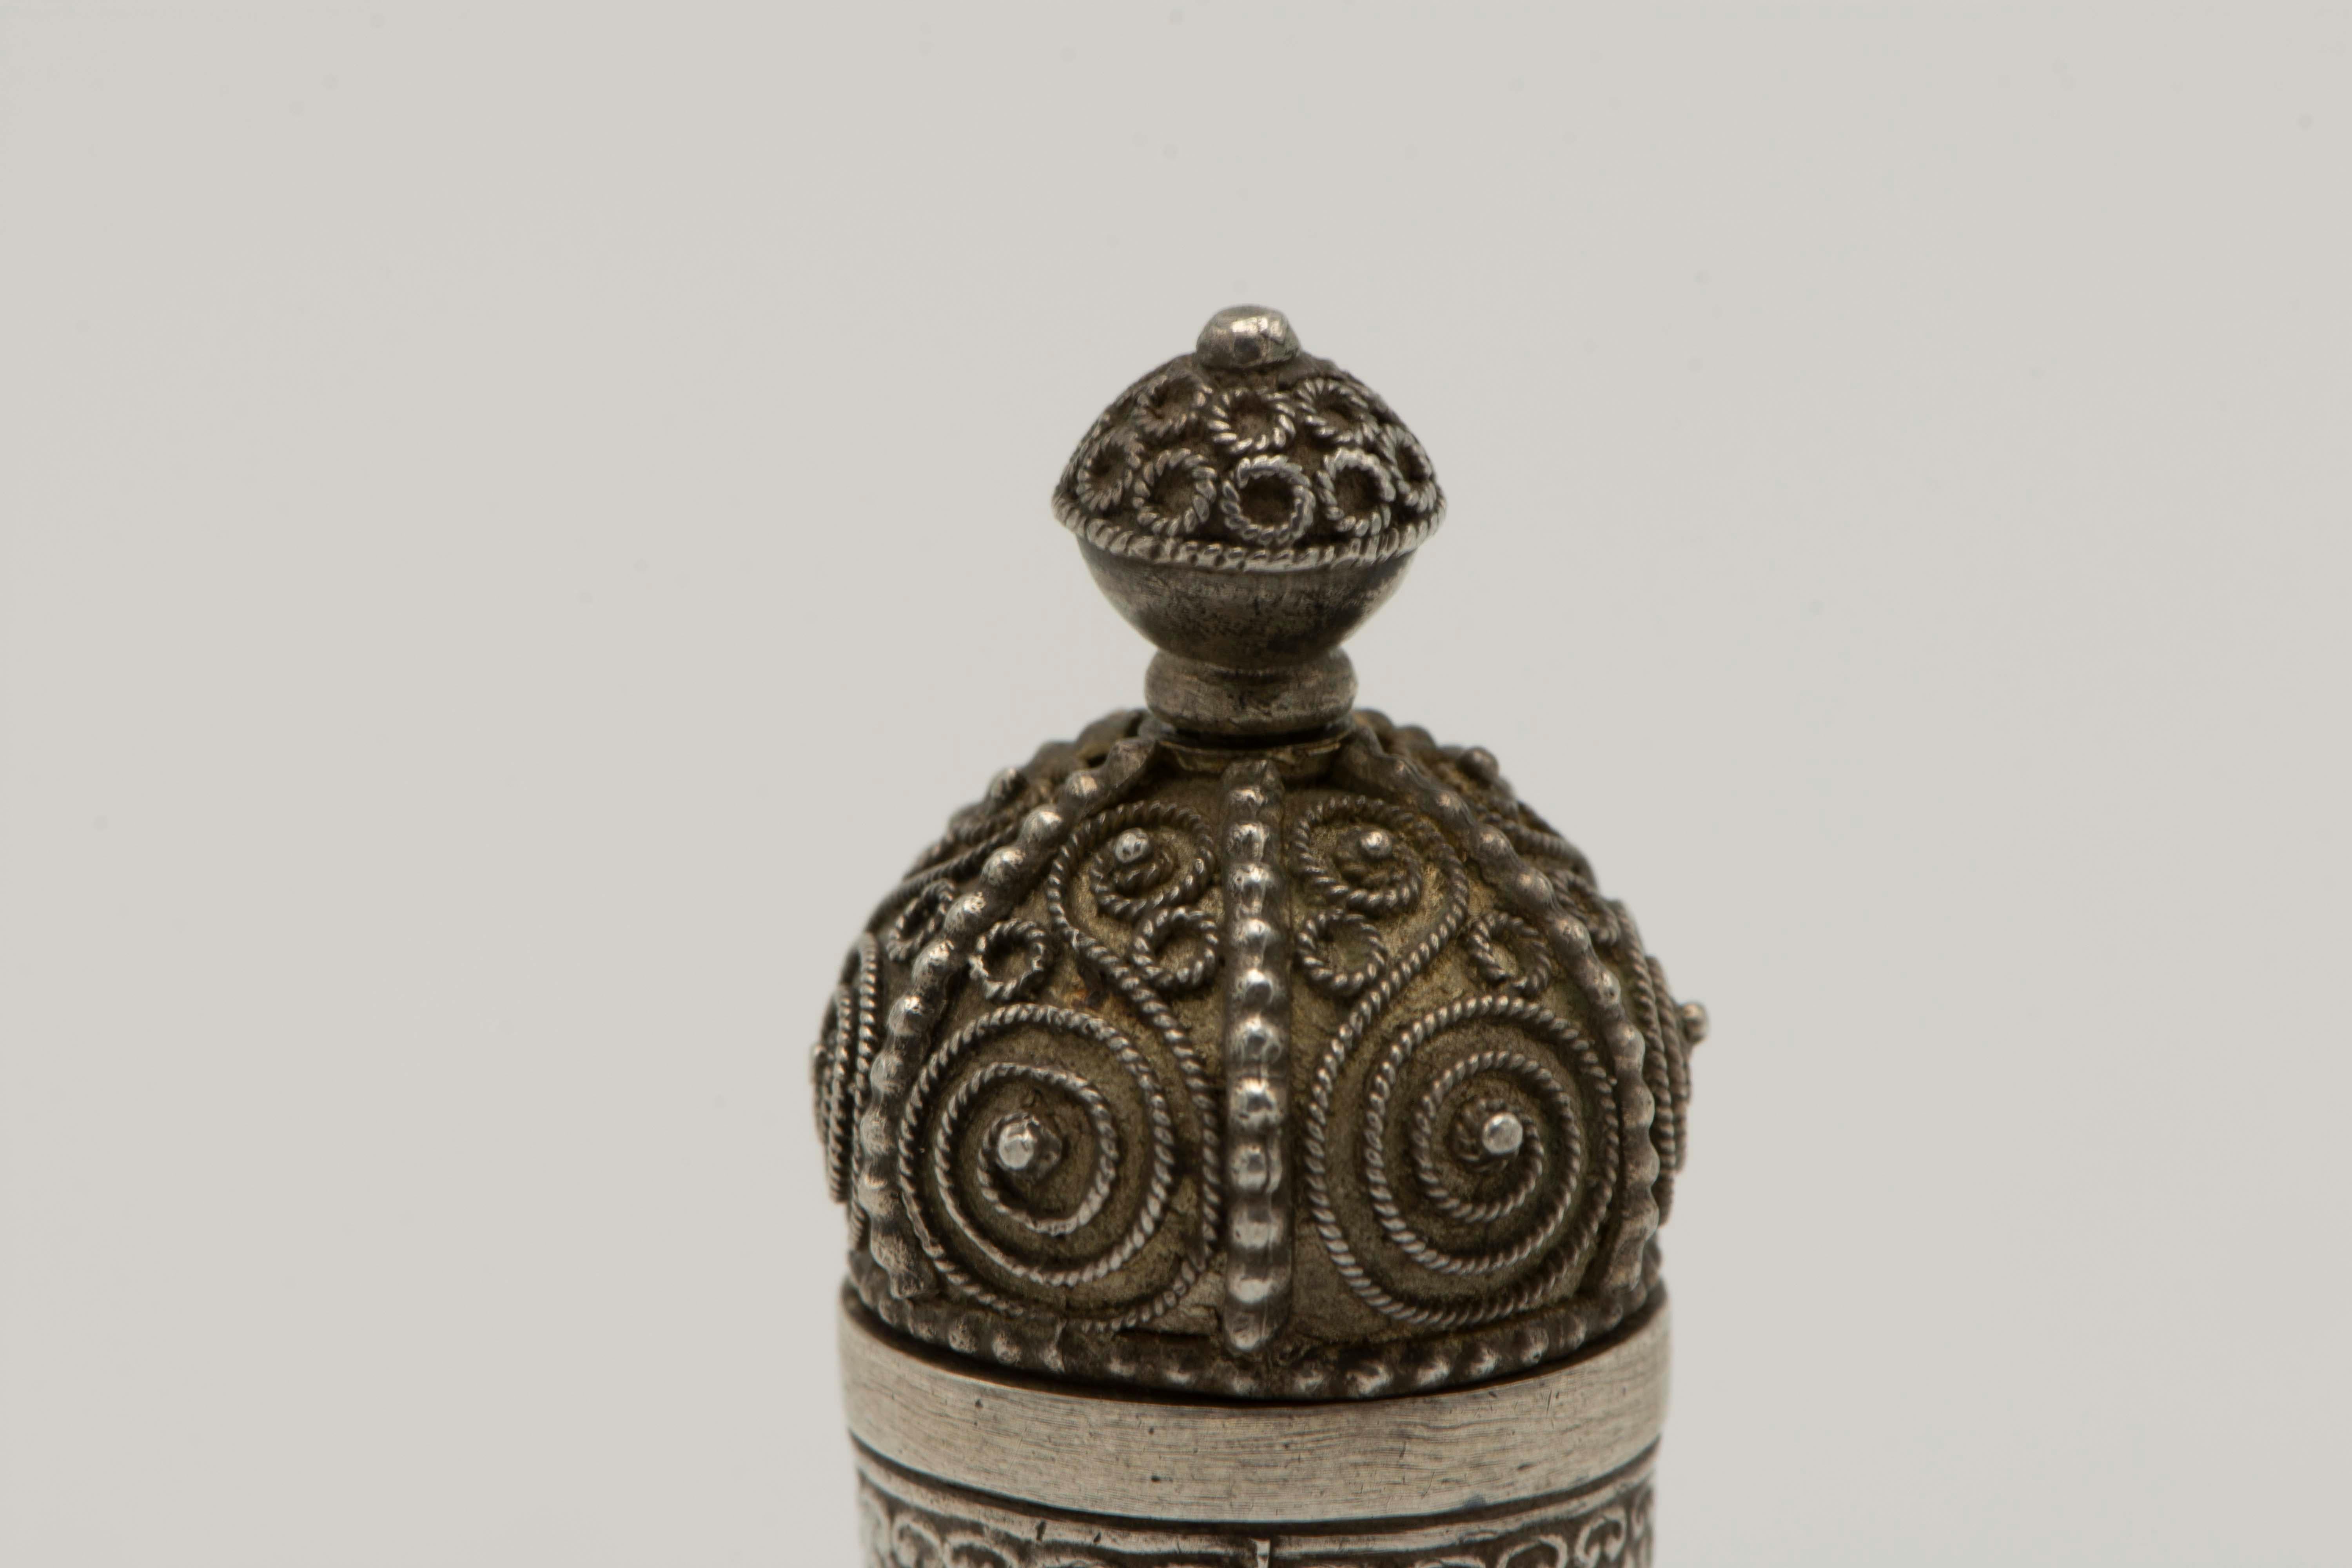 Hand-Crafted Early 20th Century Silver Megillah Case and Scroll by Bezalel School, Jerusalem